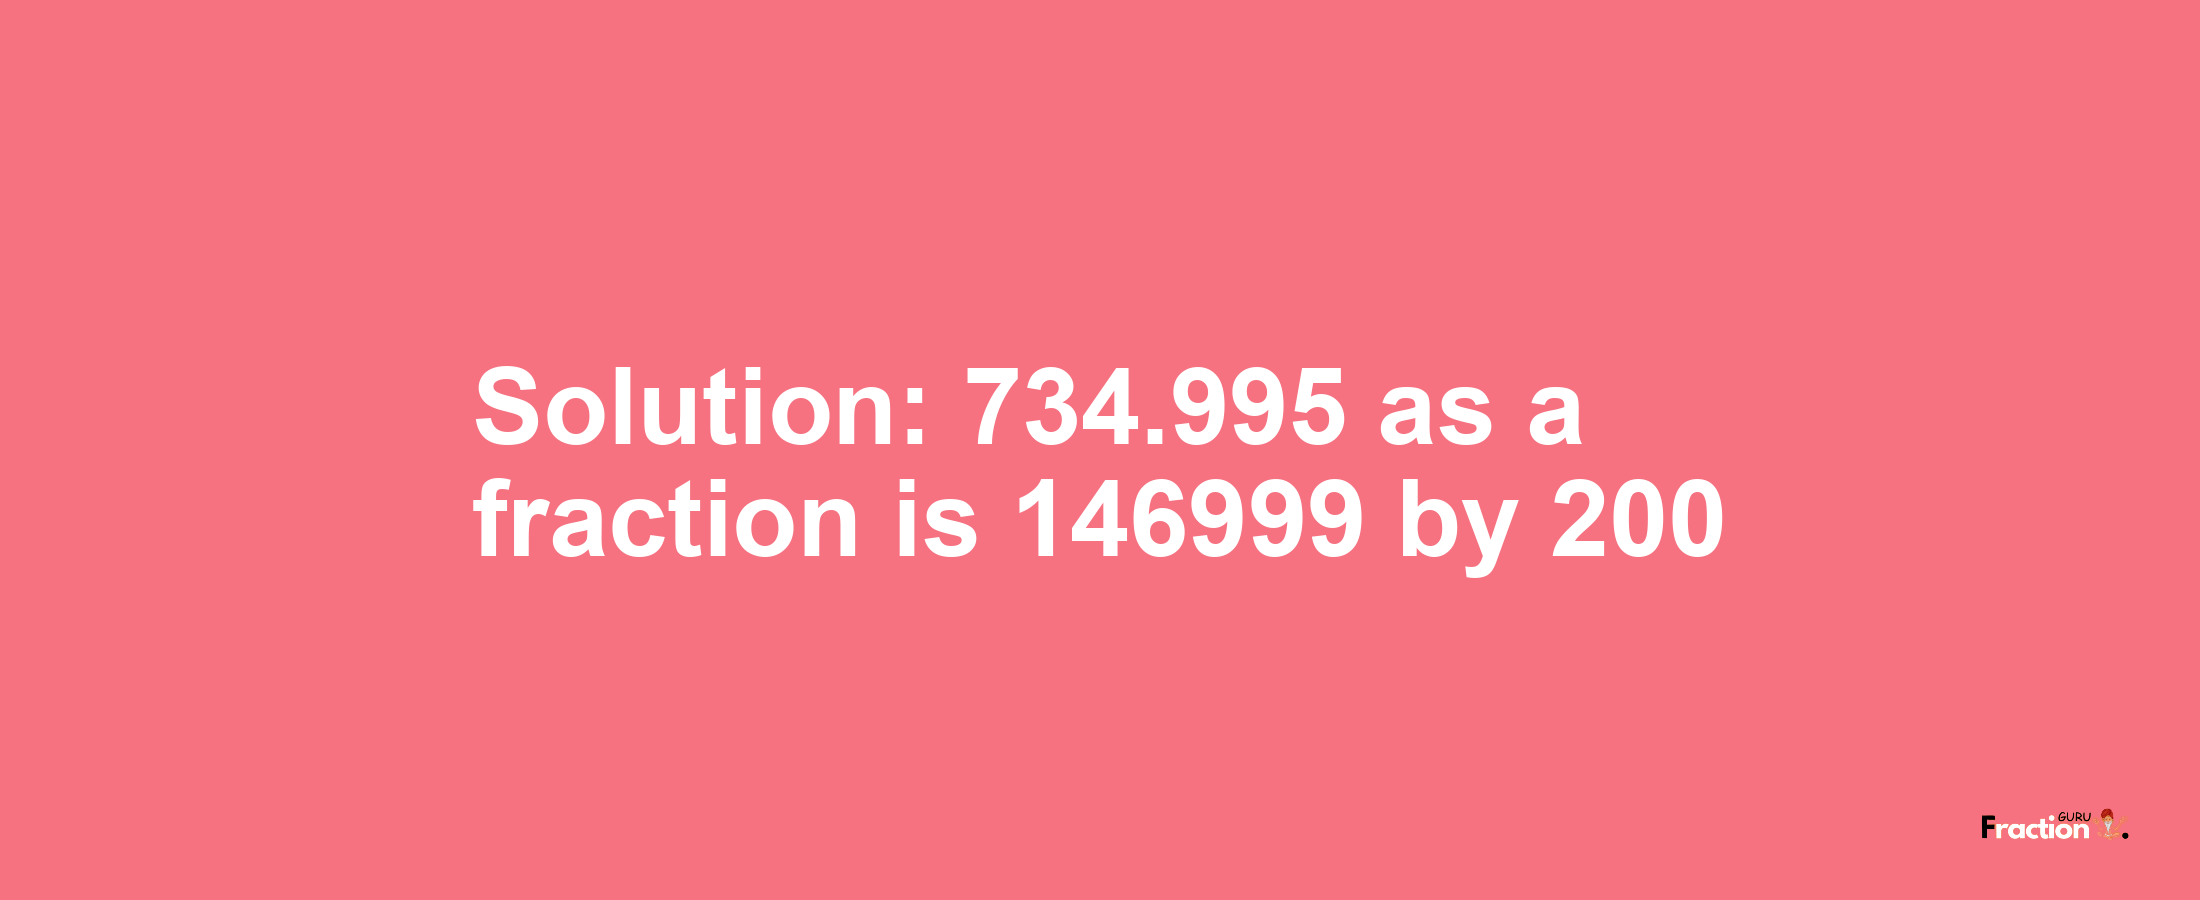 Solution:734.995 as a fraction is 146999/200